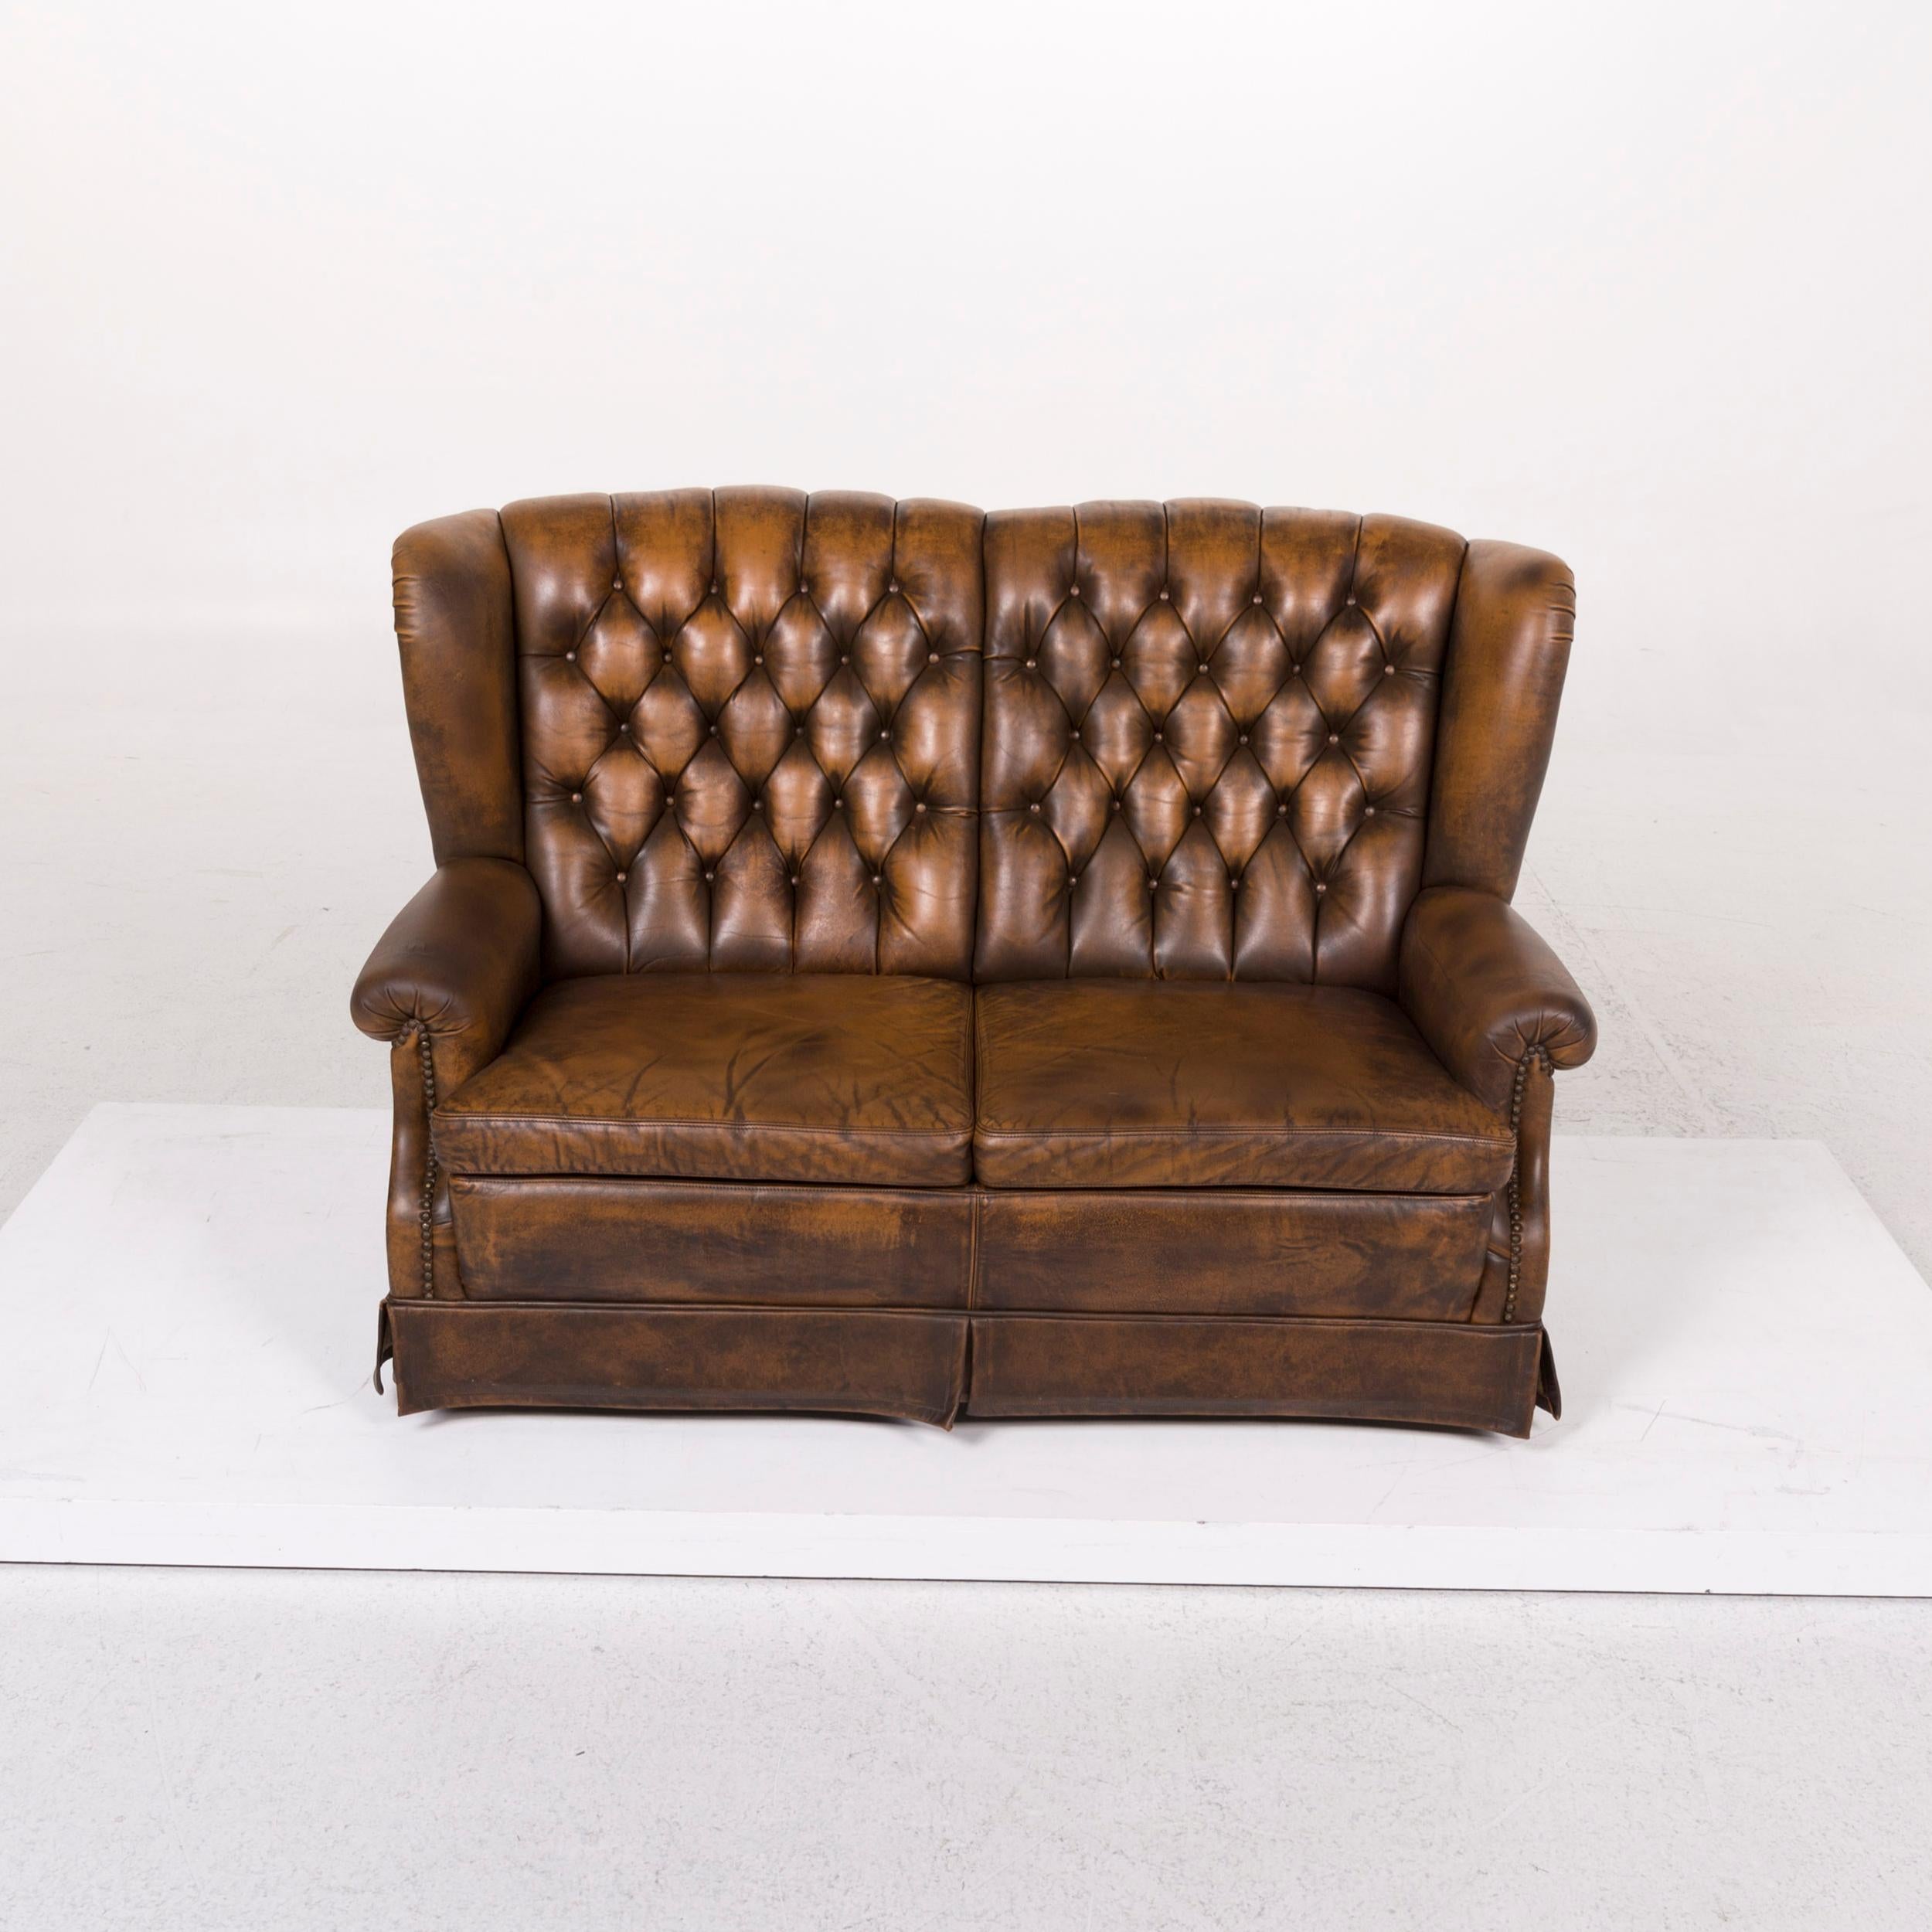 British Chesterfield Leather Sofa Brown Two-seat For Sale